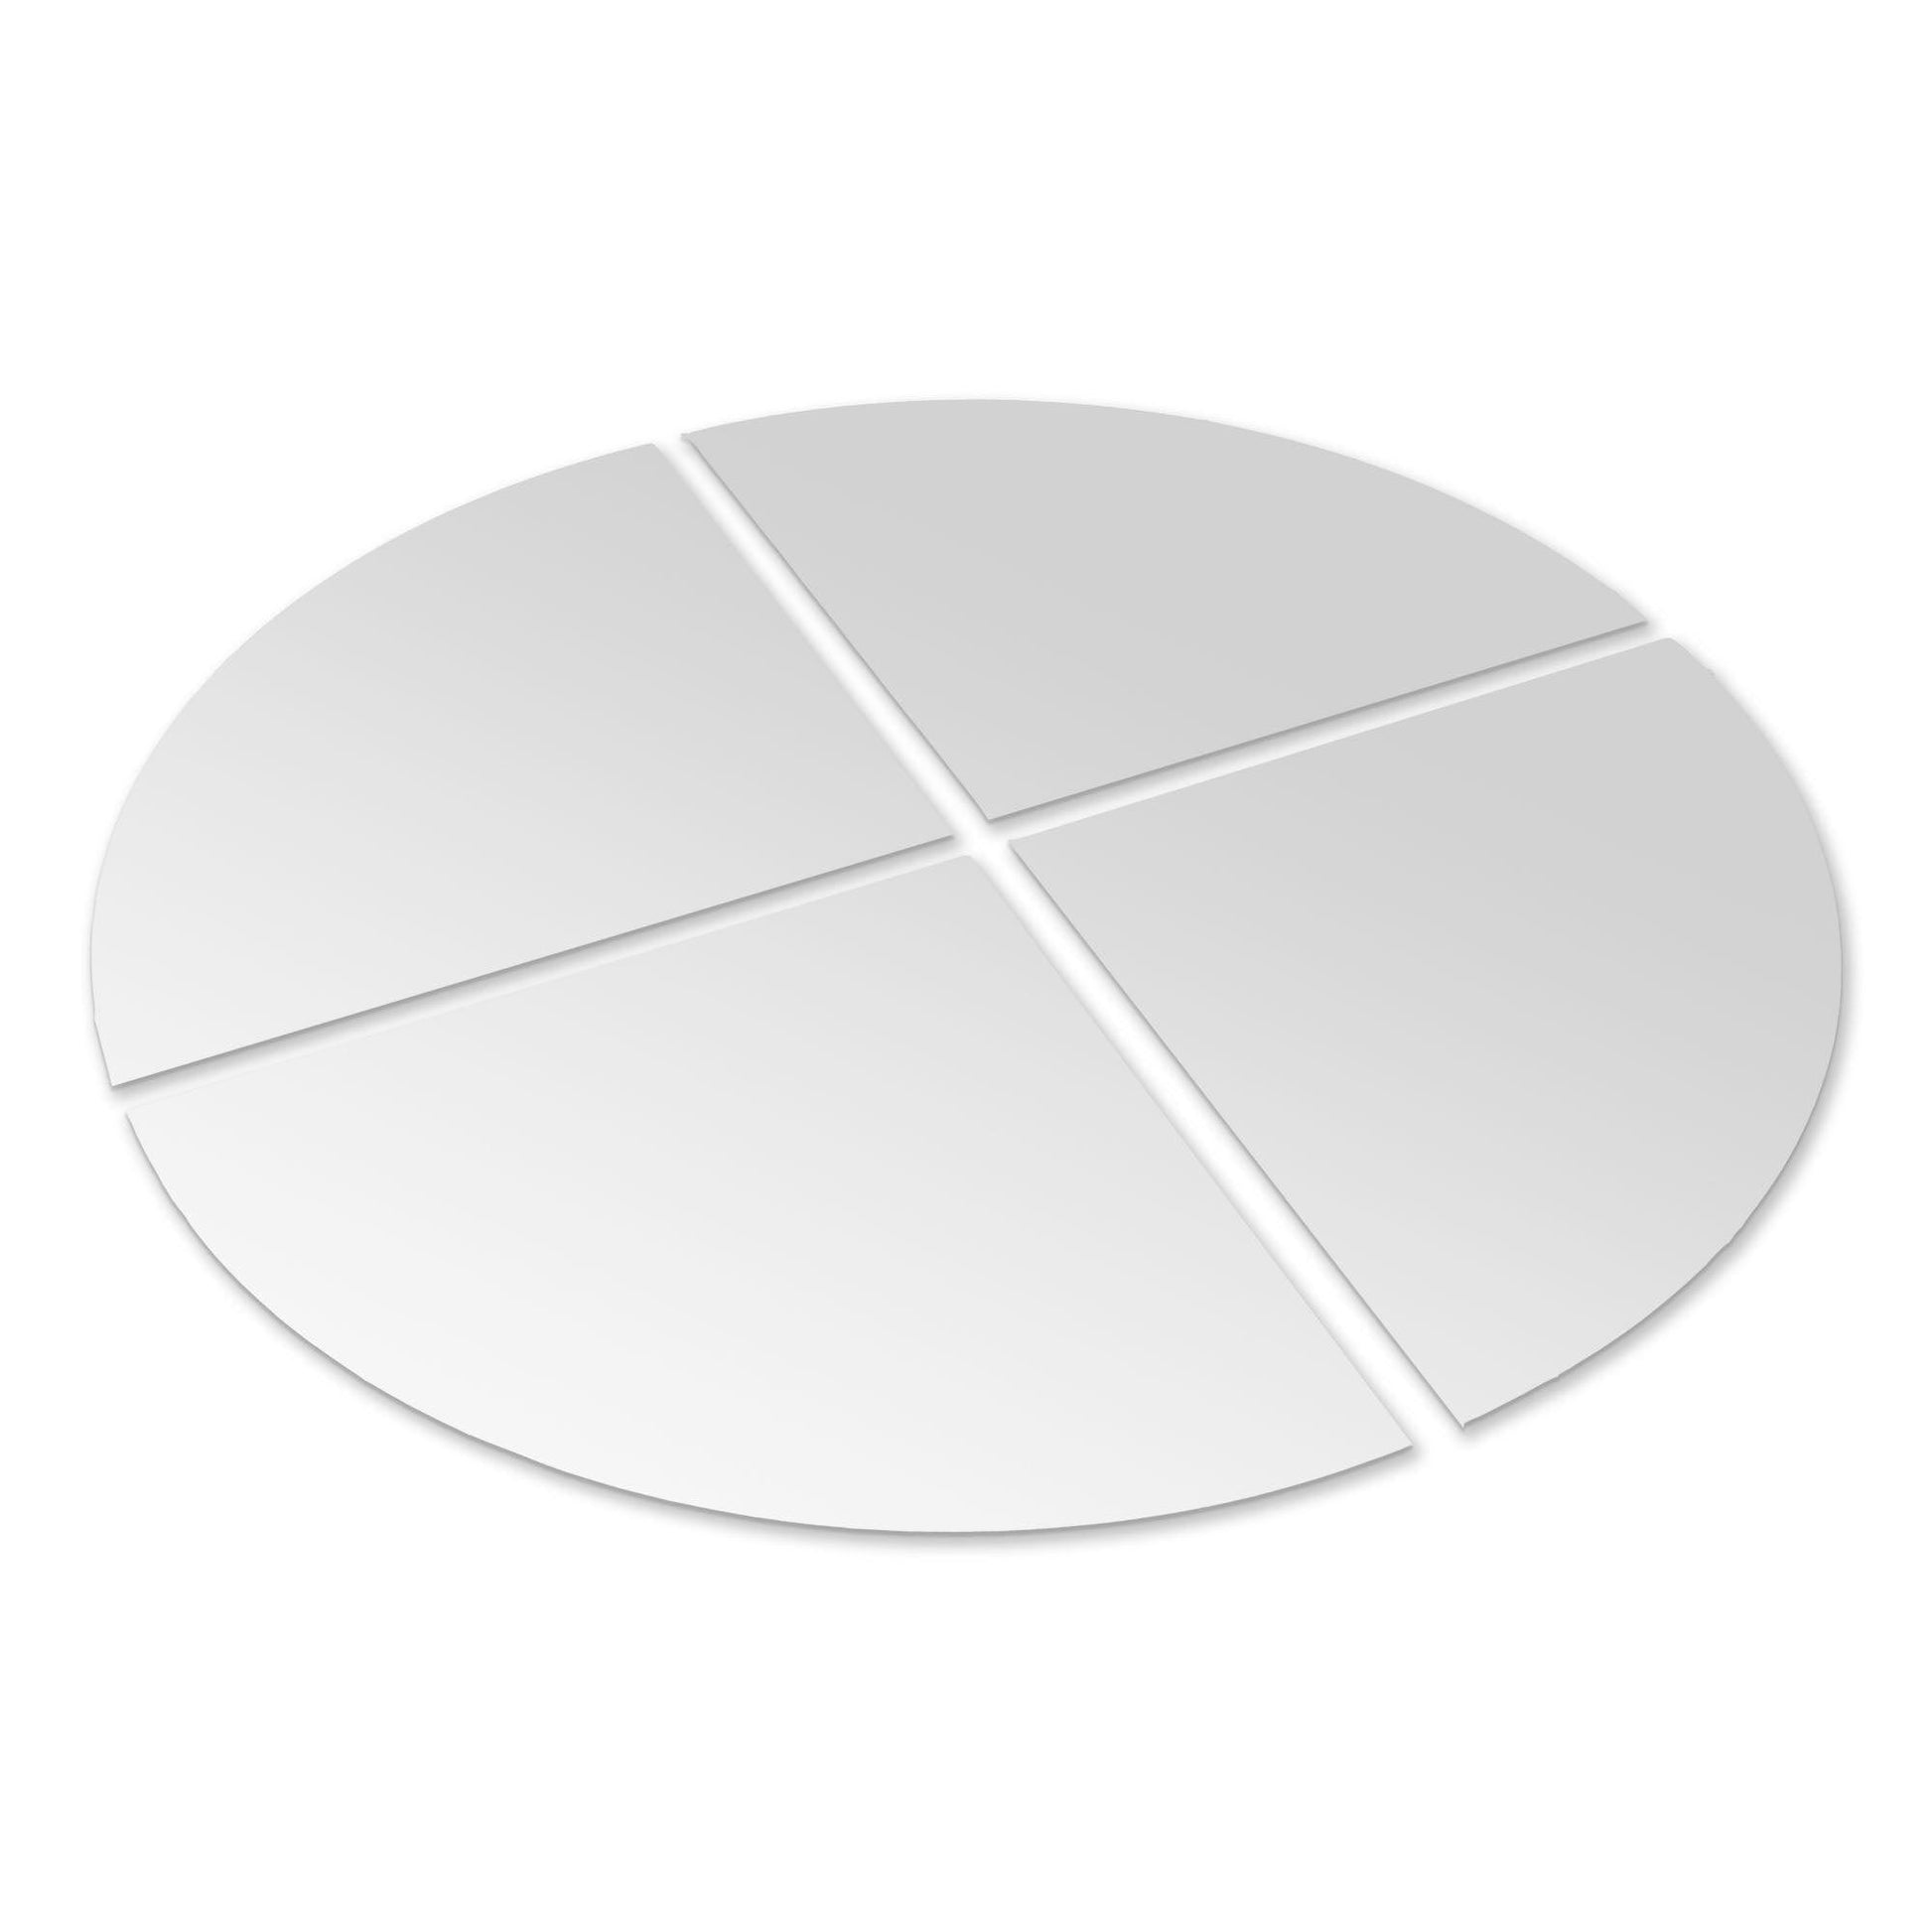 Americanflat Adhesive Mirror Tiles - Peel and Stick Mirrors for Wall -  Frameless Round Mirrors for Bedroom and Living Room Décor - Bed Bath &  Beyond - 36030831